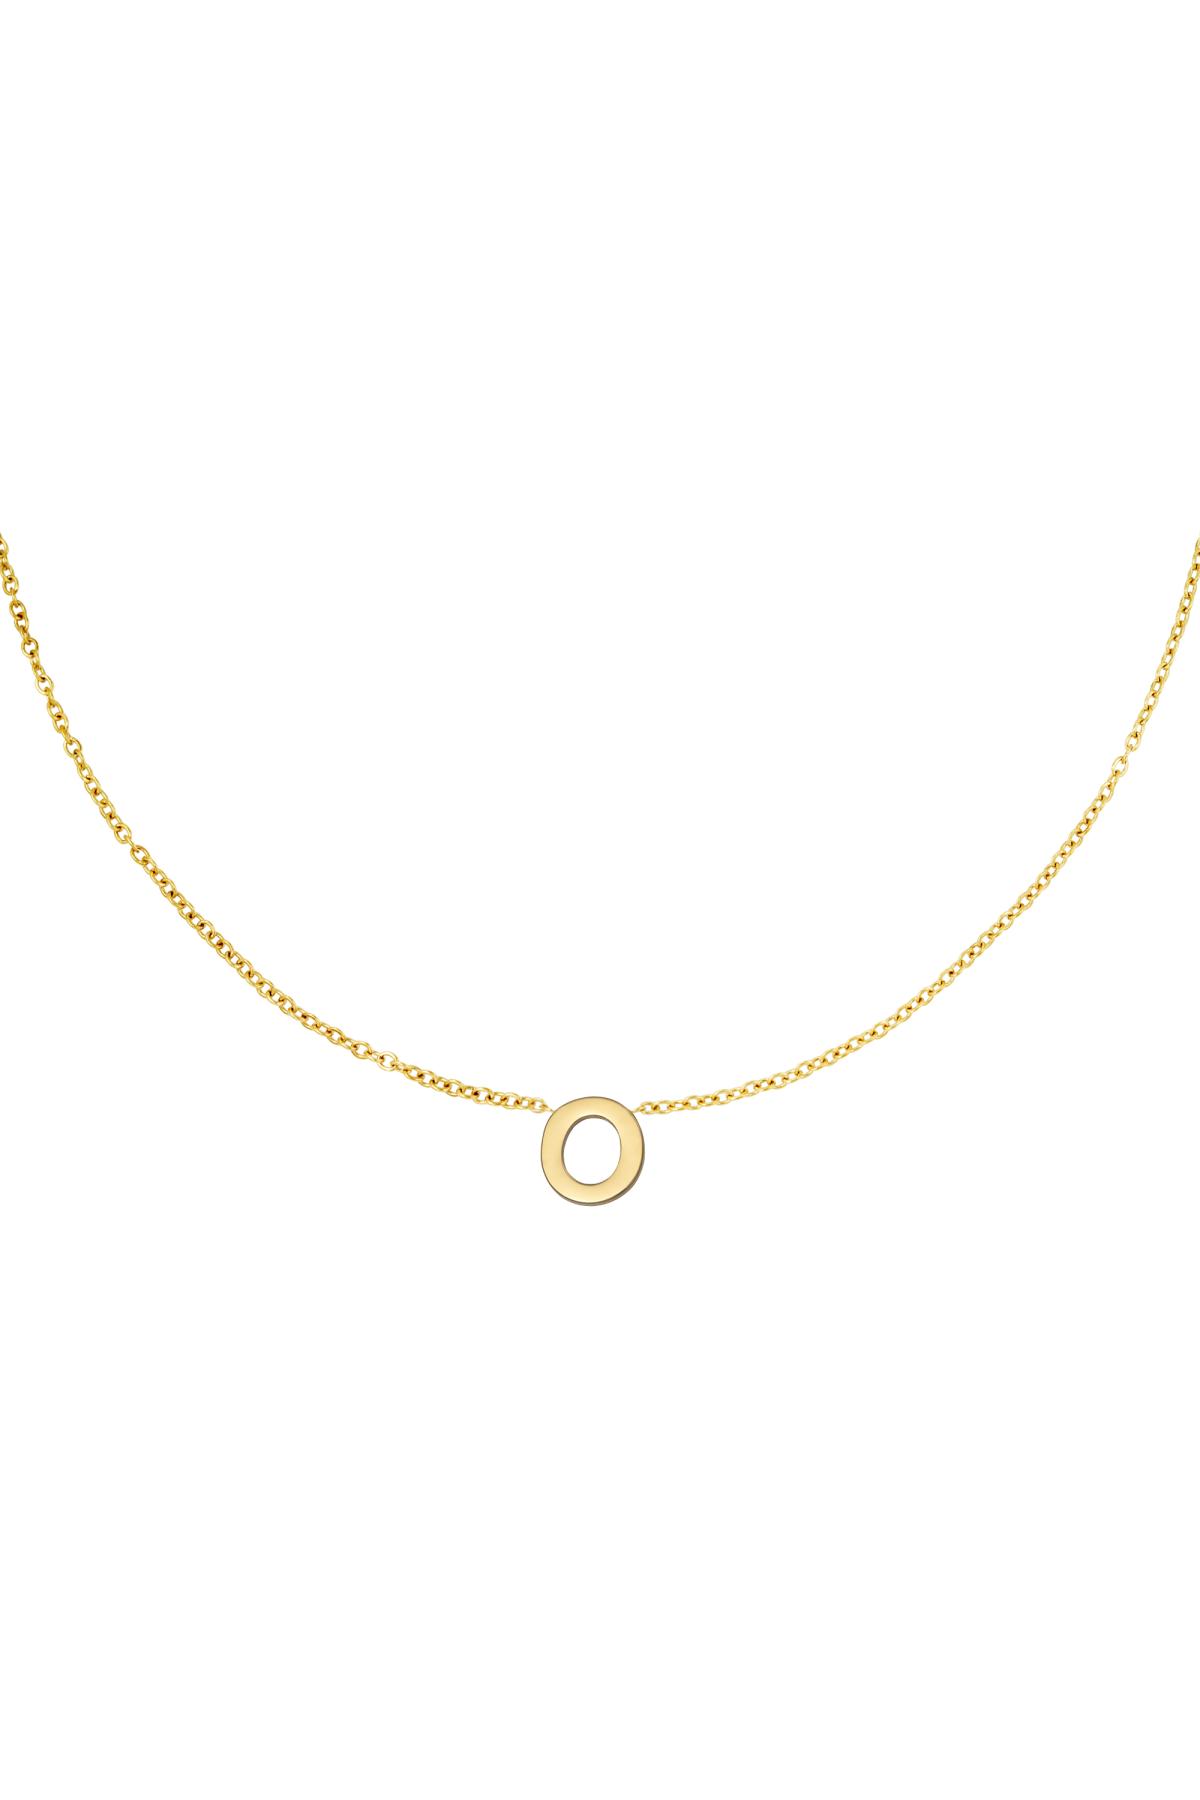 Gold / Stainless steel necklace initial O Gold 